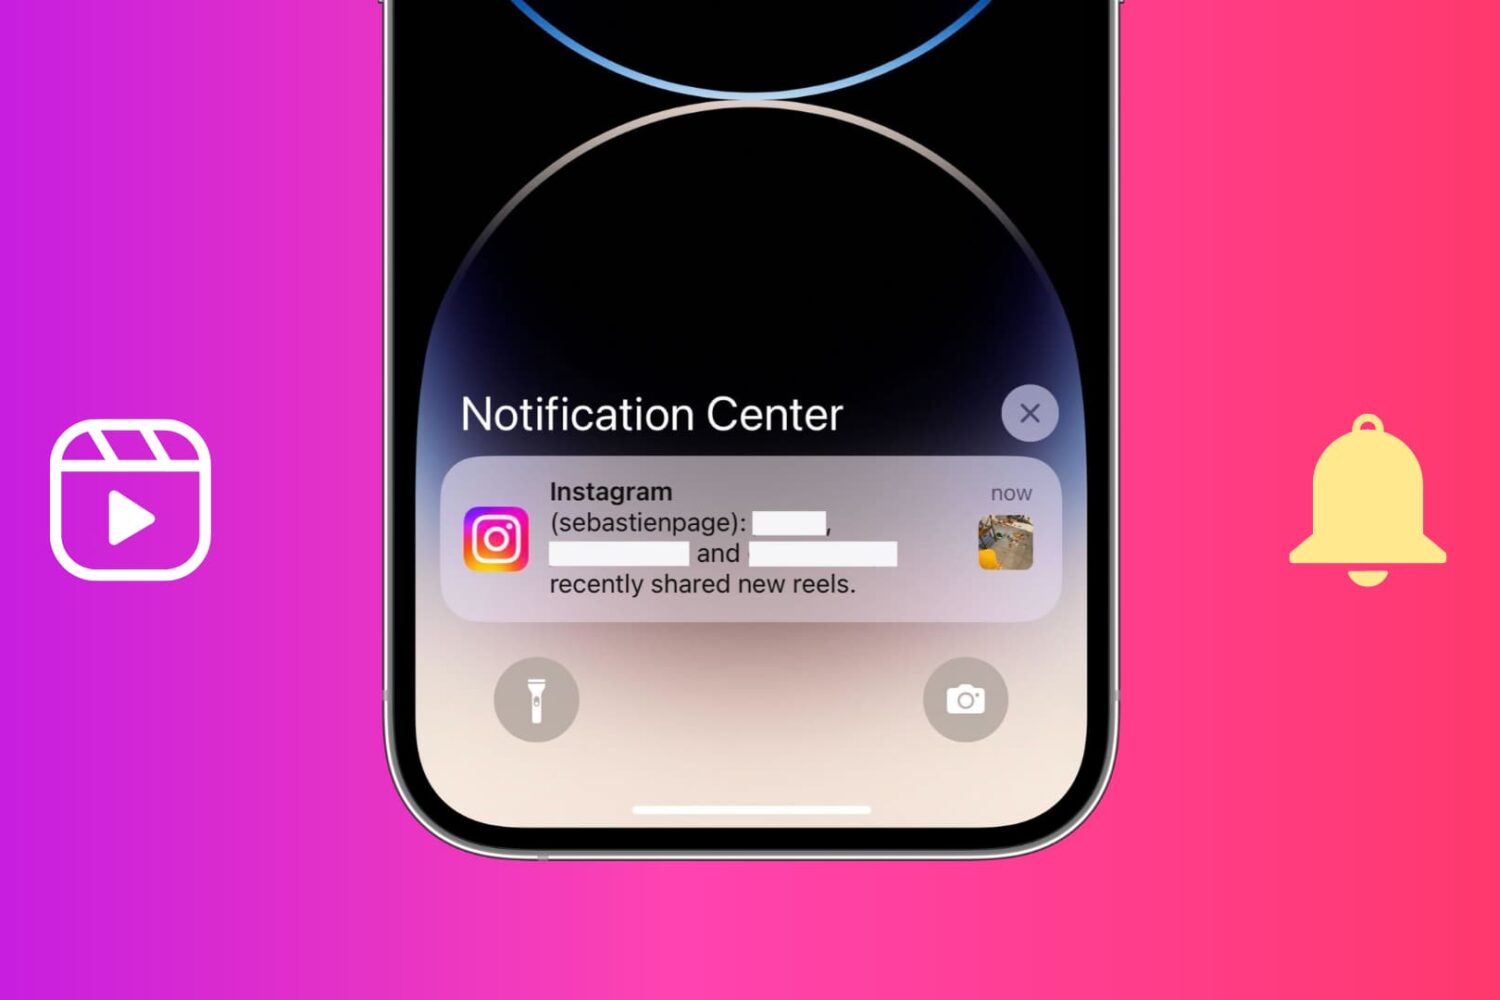 iPhone screen showing recently shared new Reels notification from Instagram with a Reels and bell icon in the background